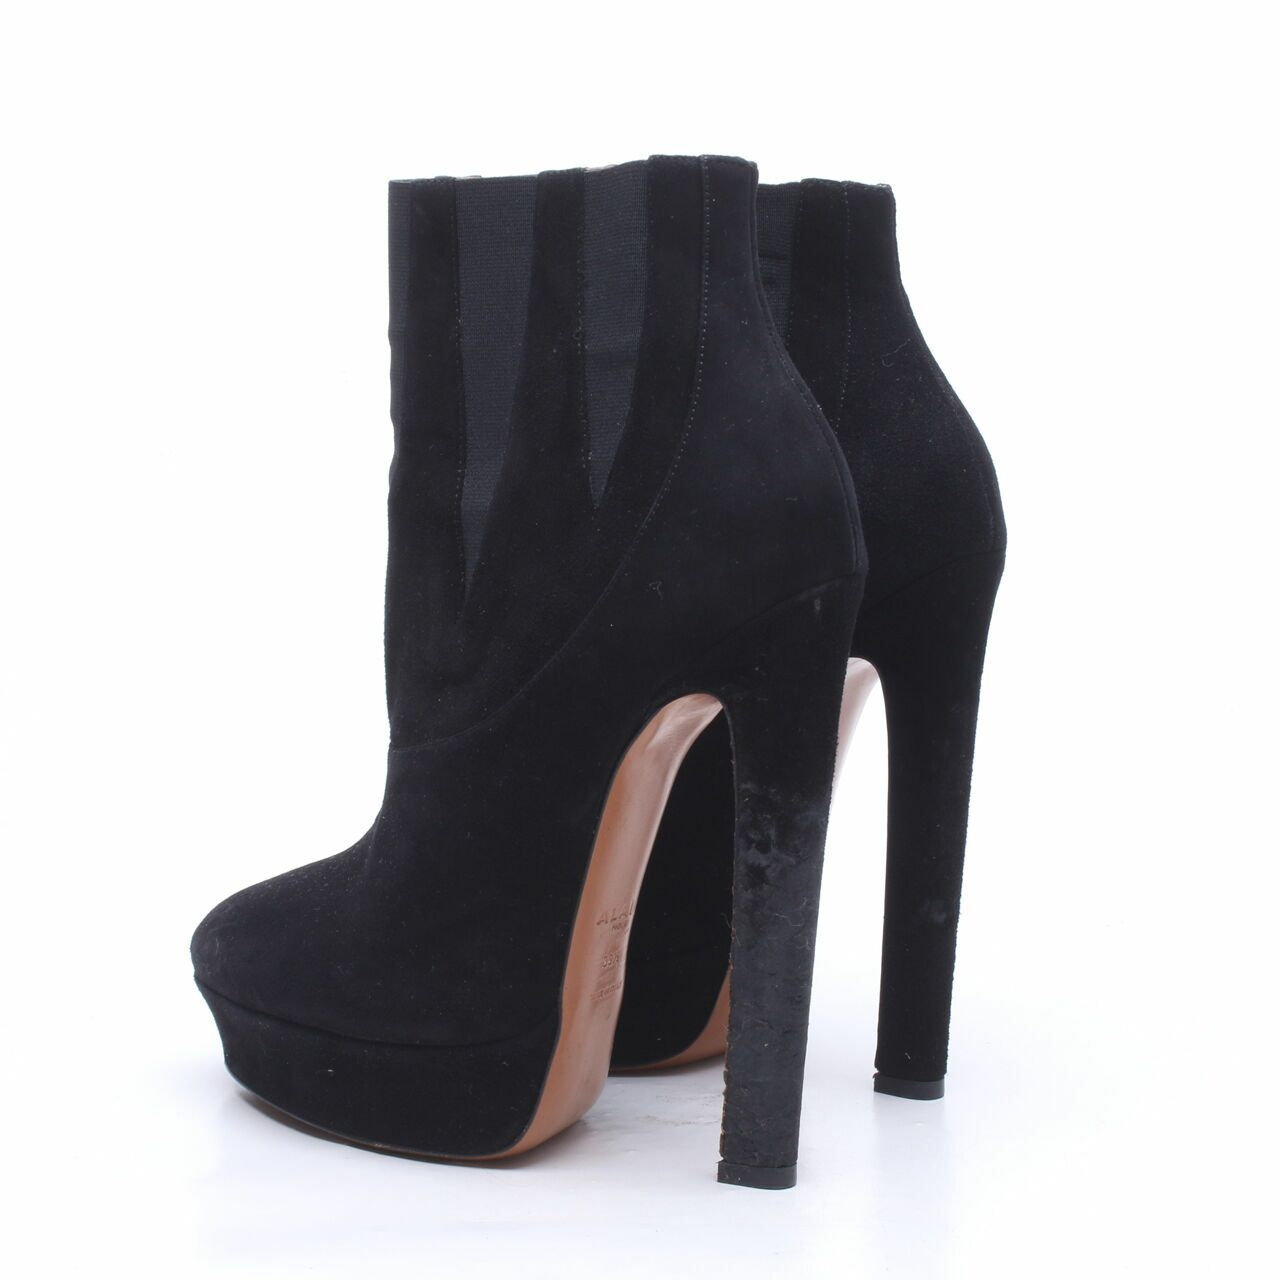 Alaia Black Suede Ankle Boots